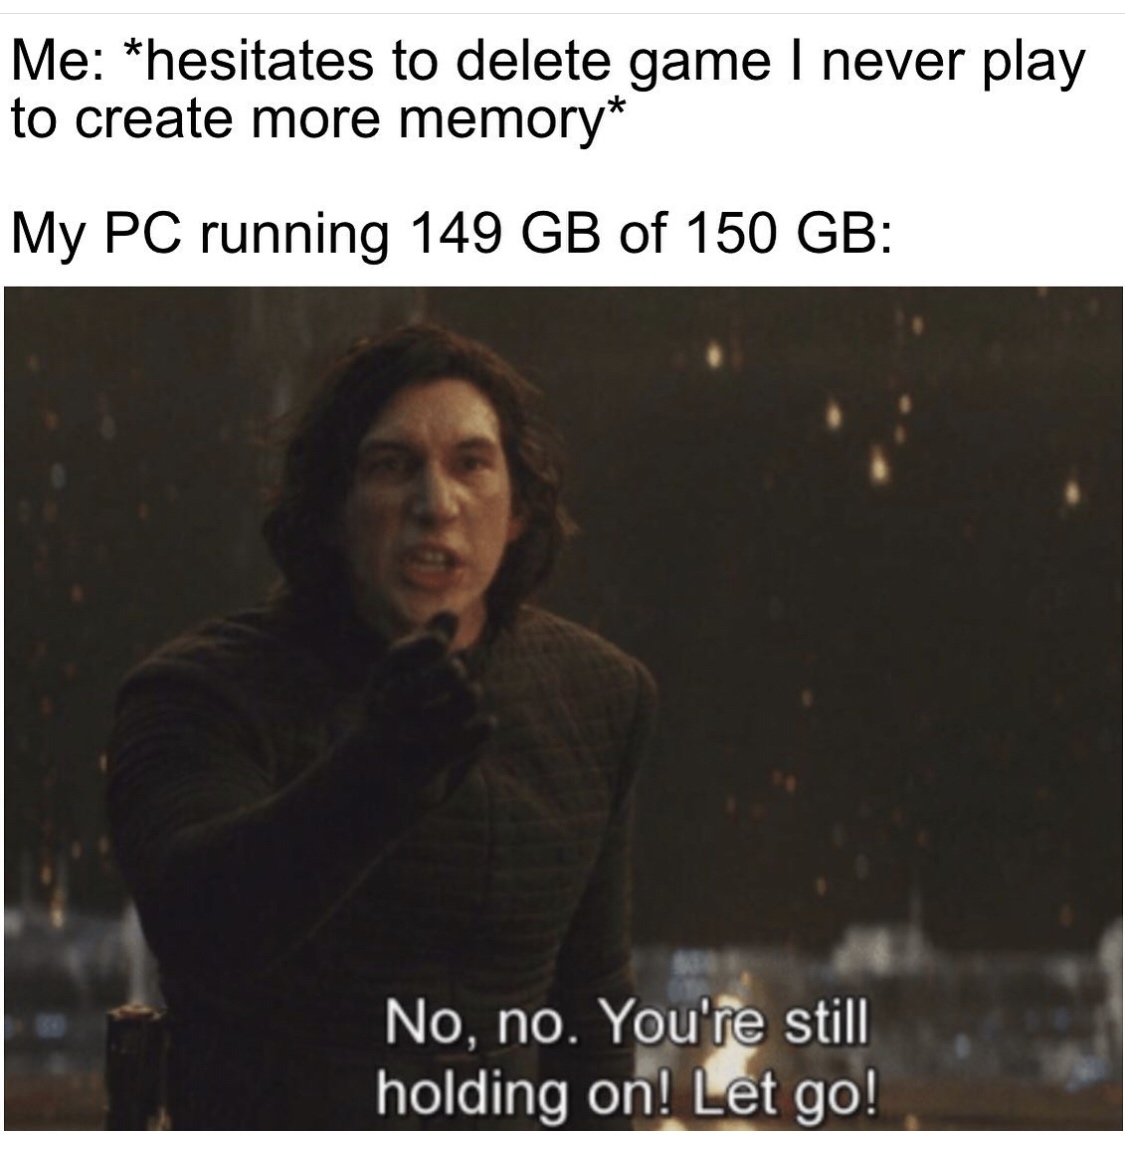 you re still holding on let go meme - Me hesitates to delete game I never play to create more memory My Pc running 149 Gb of 150 Gb No, no. You're still holding on! Let go!